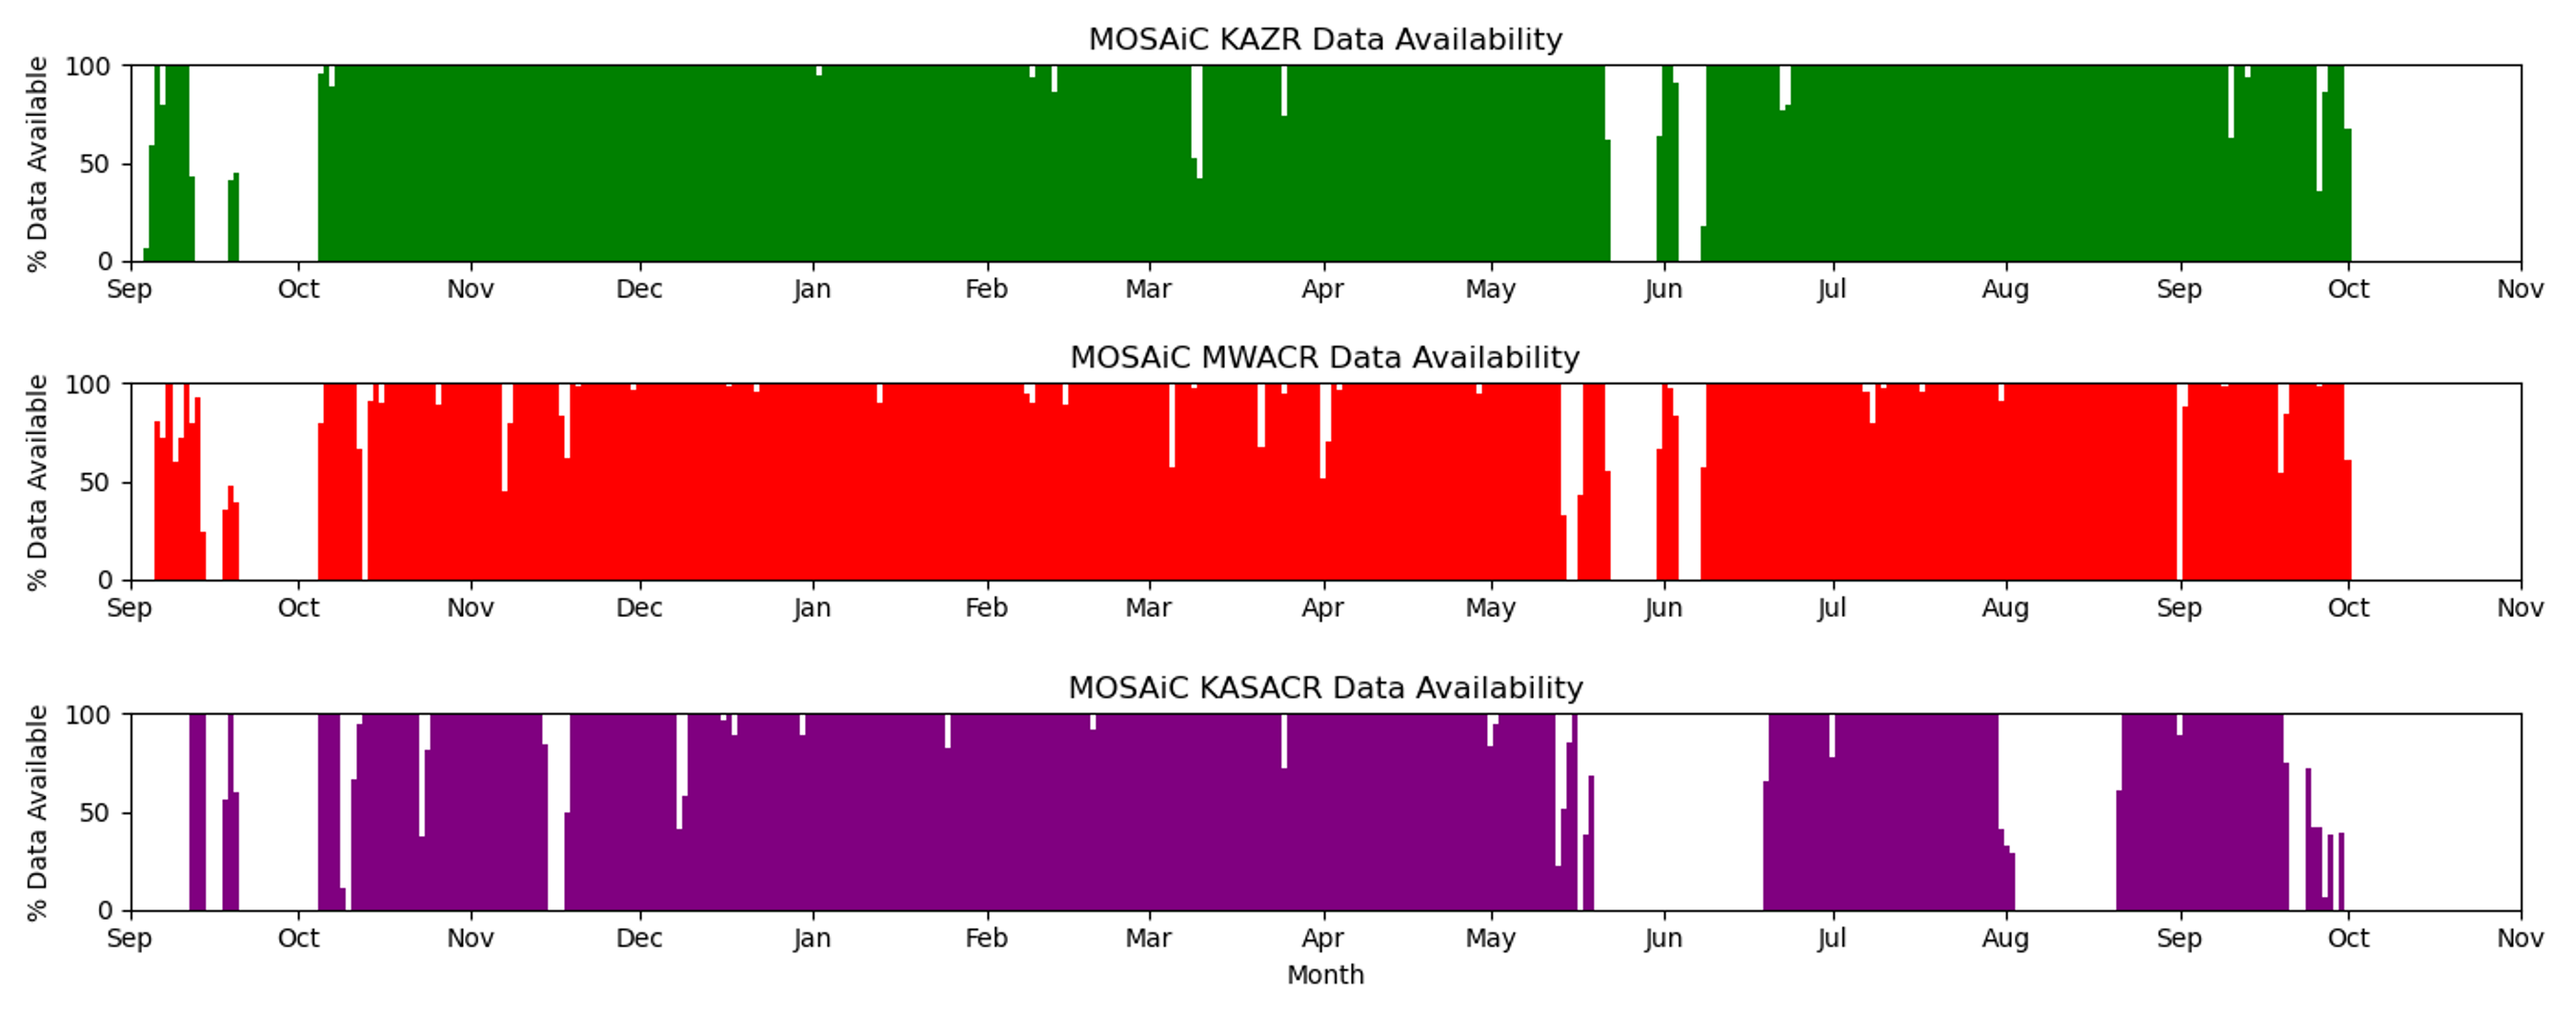 Data availability per day for the KAZR, MWACR, and Ka-Band Scanning ARM Cloud Radar (KASACR) during MOSAiC is shown as a percentage of expected operations.